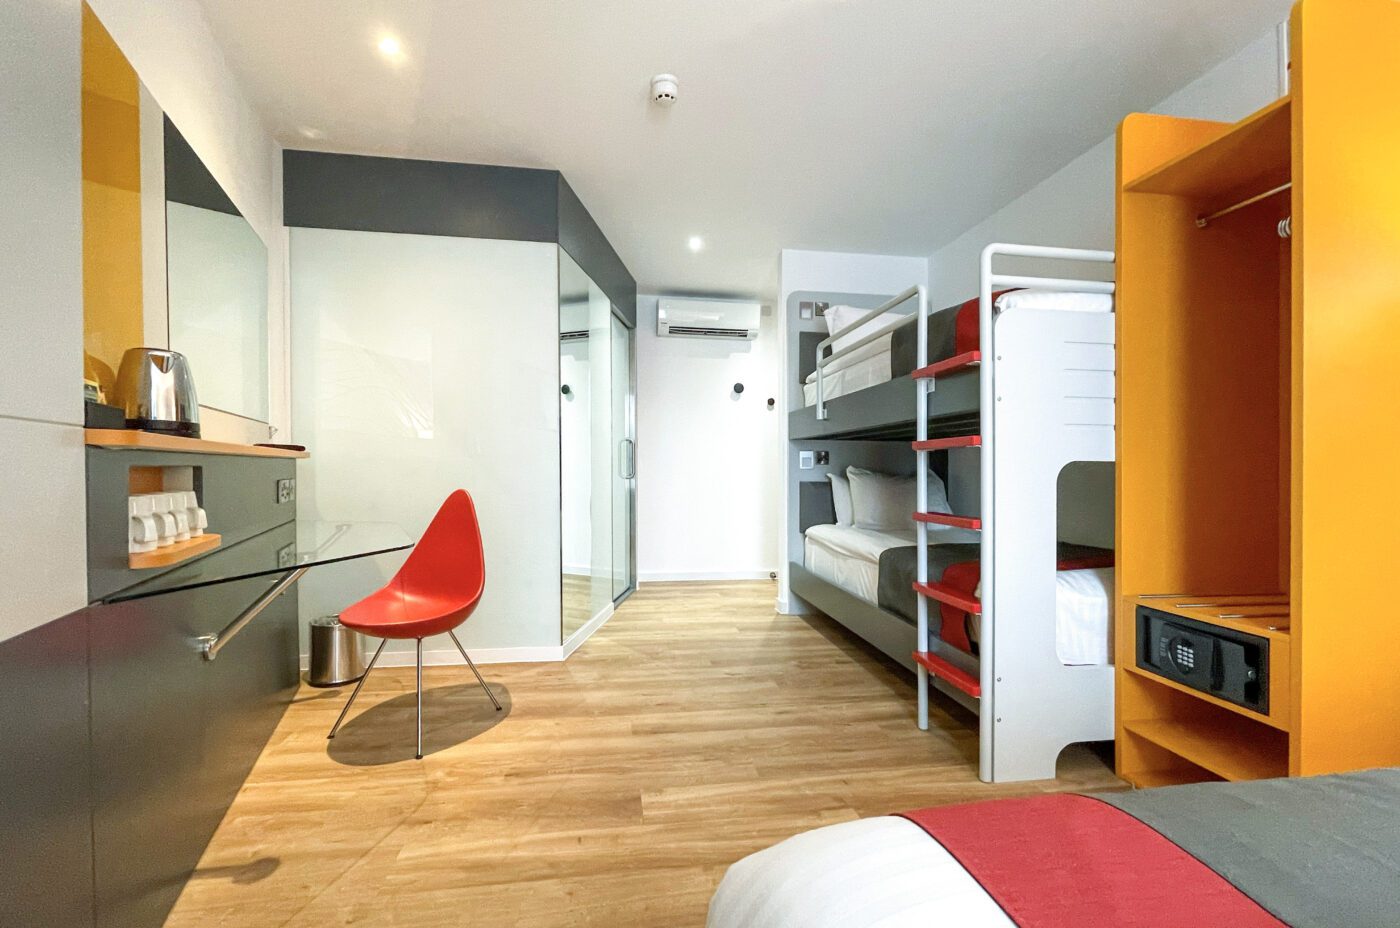 Family sized room with a double bed, built in wardrobe, HD television, bunk beds and seating area.